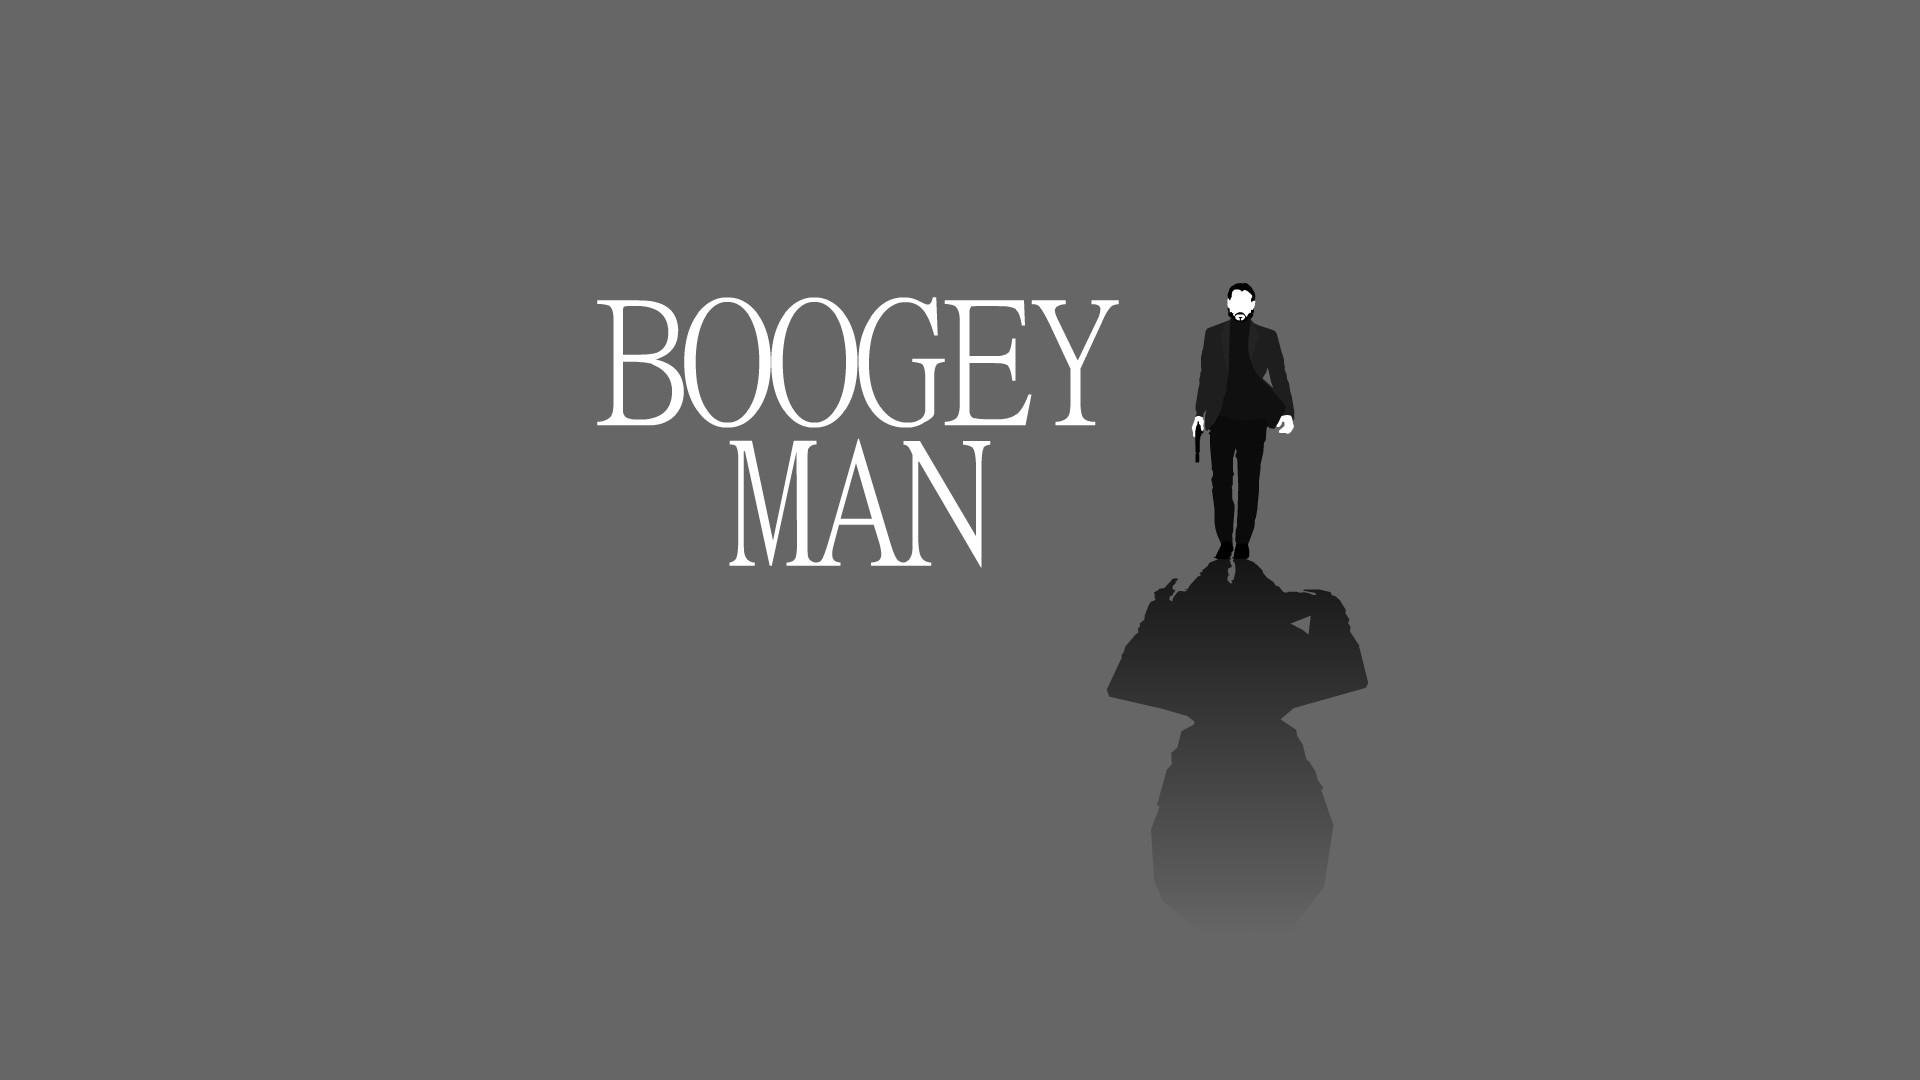 John Wick is the Boogie Man Wallpaper and Free Stock